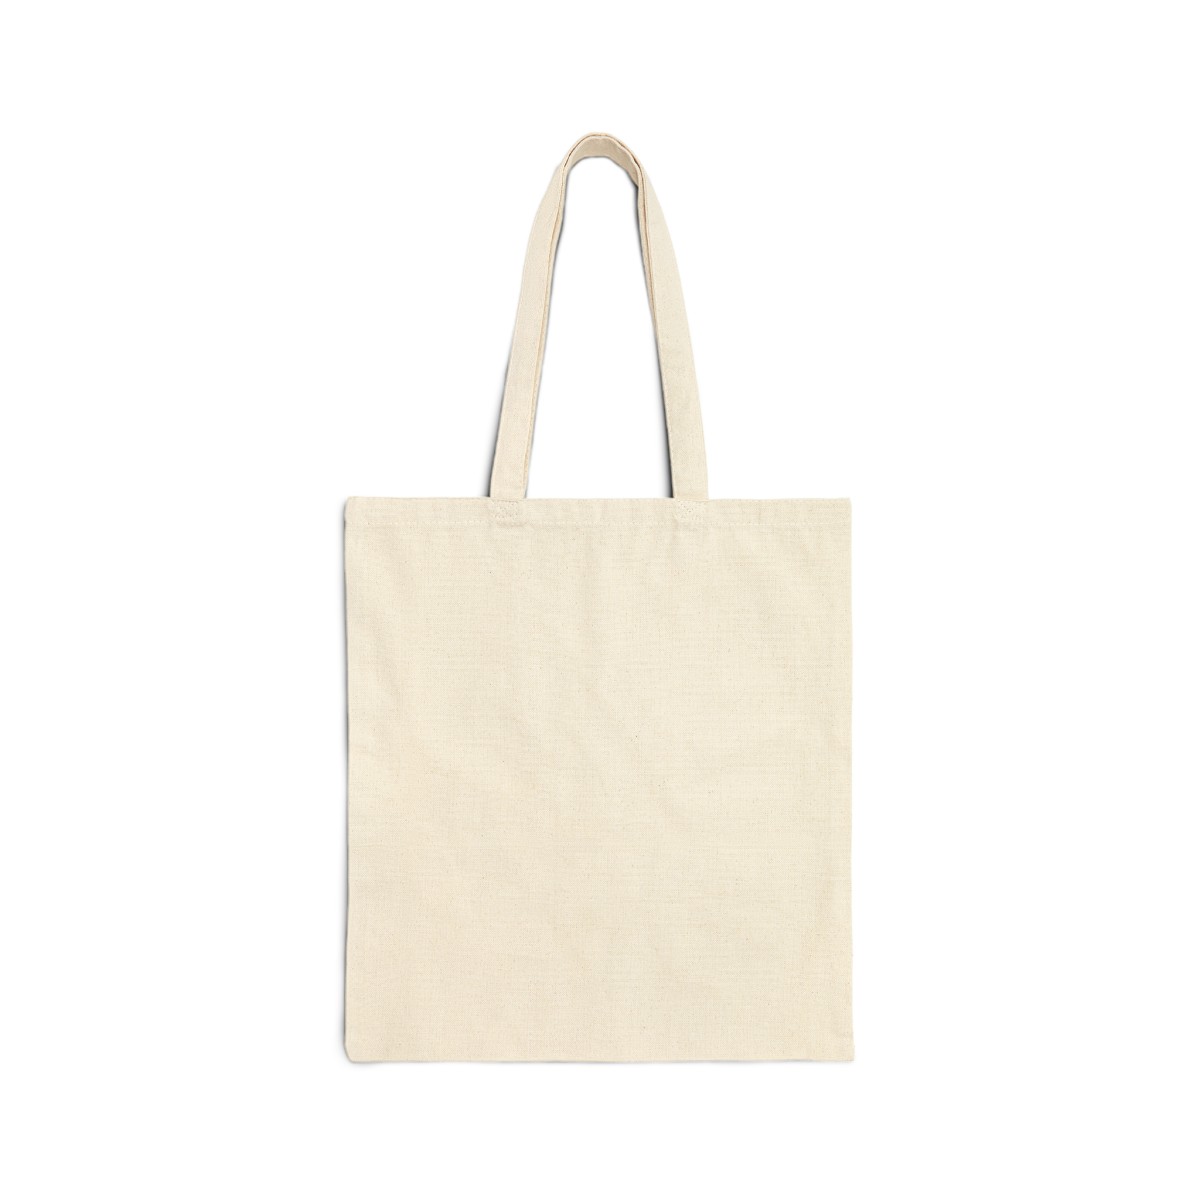 "2024 affirmations" Cotton Canvas Tote Bag product thumbnail image